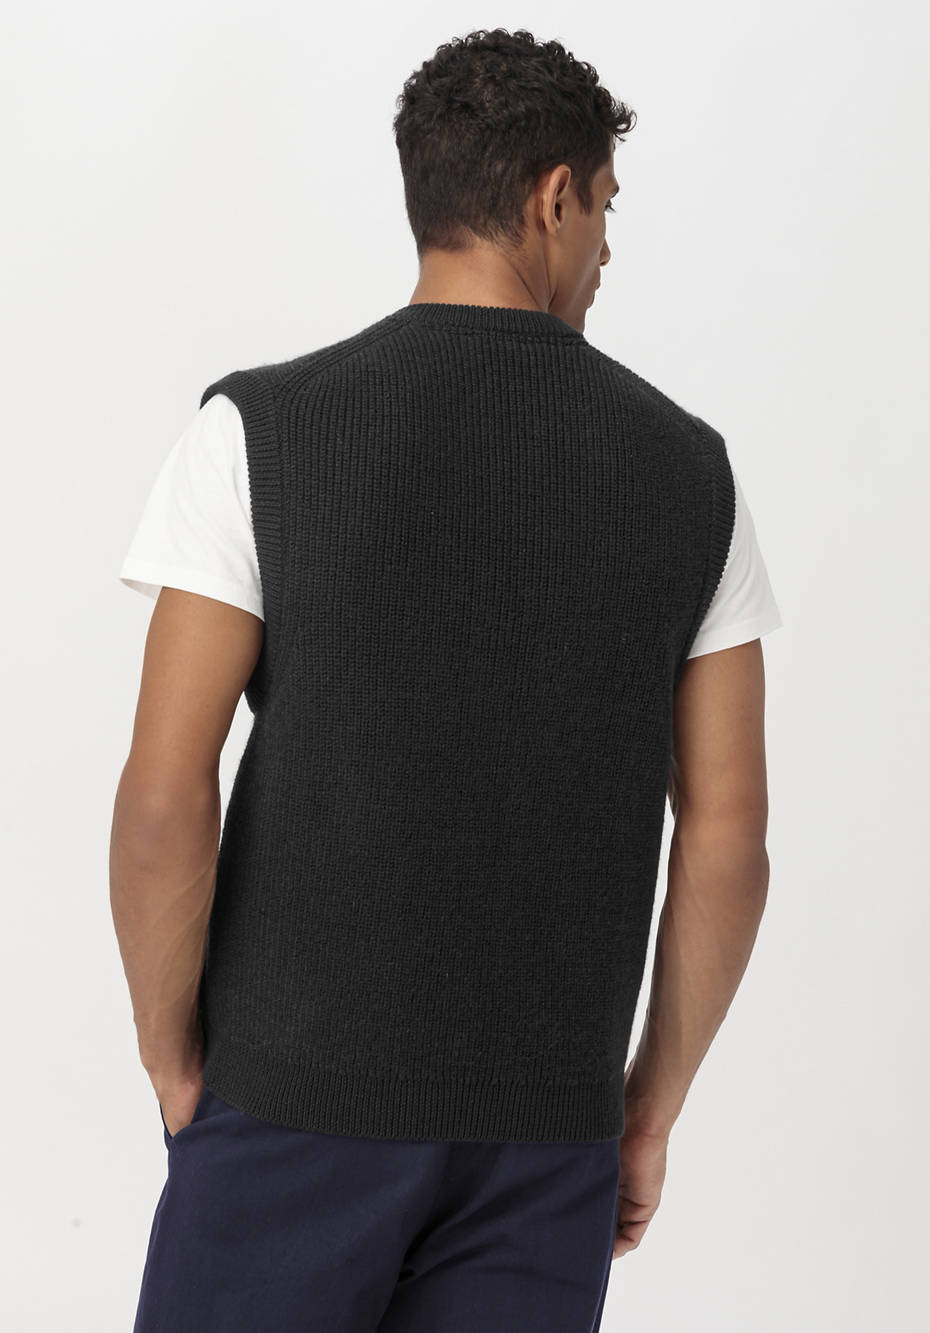 Knit vest made from organic cotton and organic merino